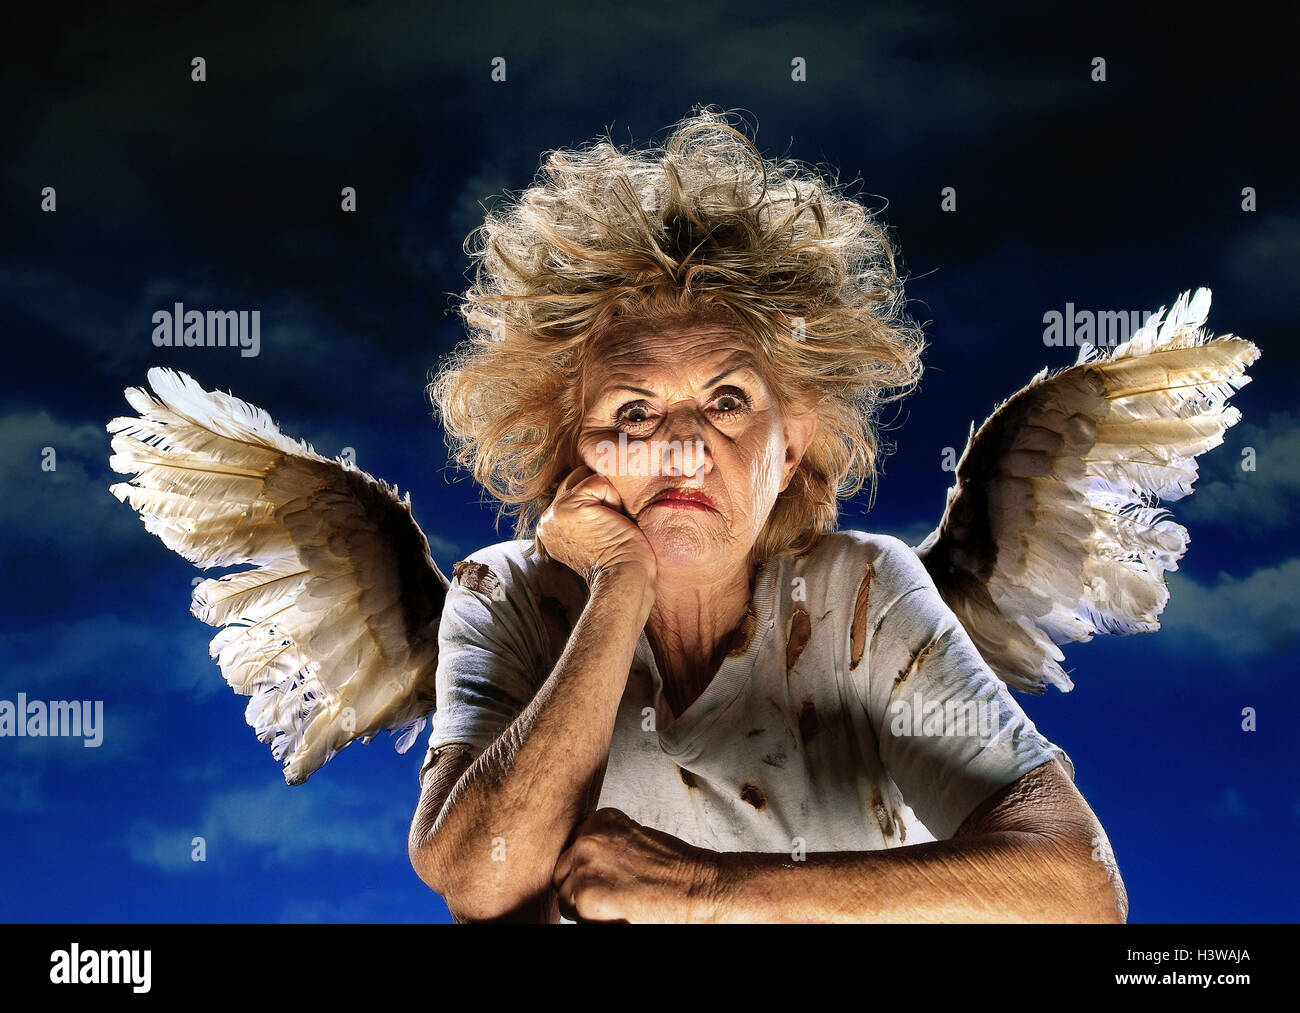 Senior, angel, facial play, nastily, fiercely, portrait, studio, 'of fallen angels', woman, old, wing, white, pulls to pieces, unkemptly, dilapidatedly, old, annoyance, discontent, background blue Stock Photo